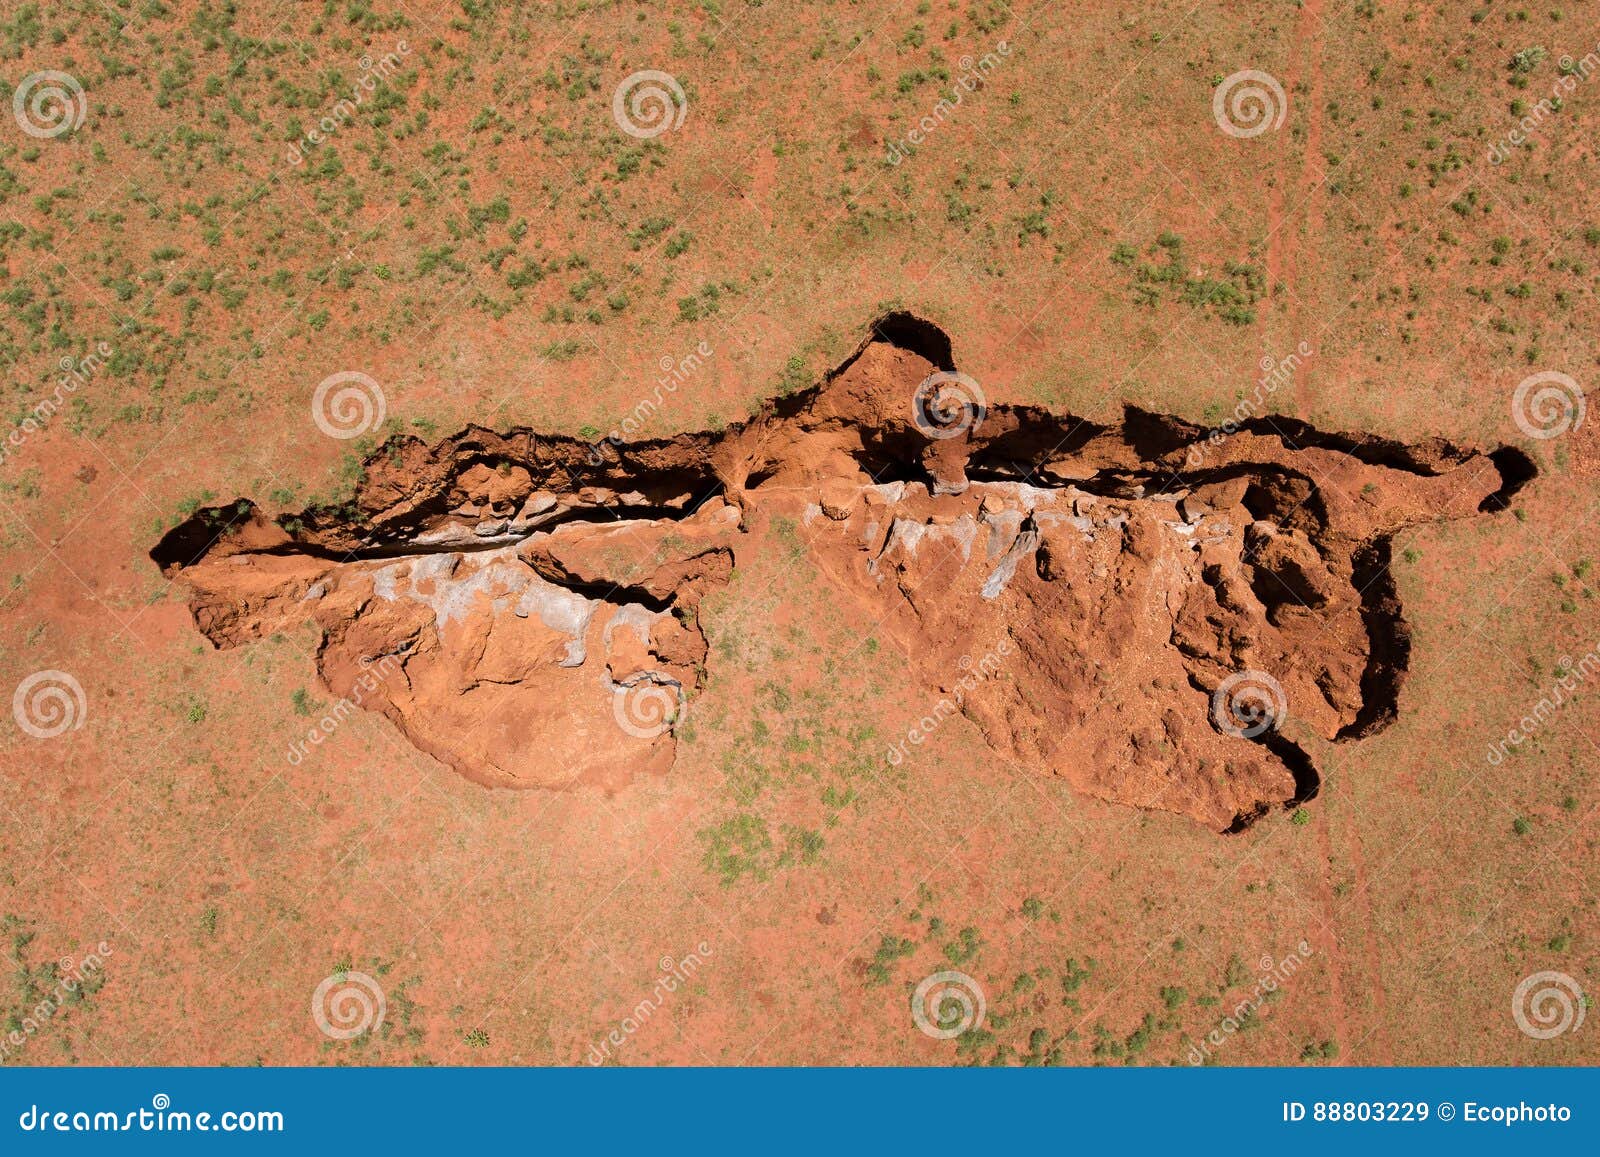 aerial view of a sinkhole - south africa